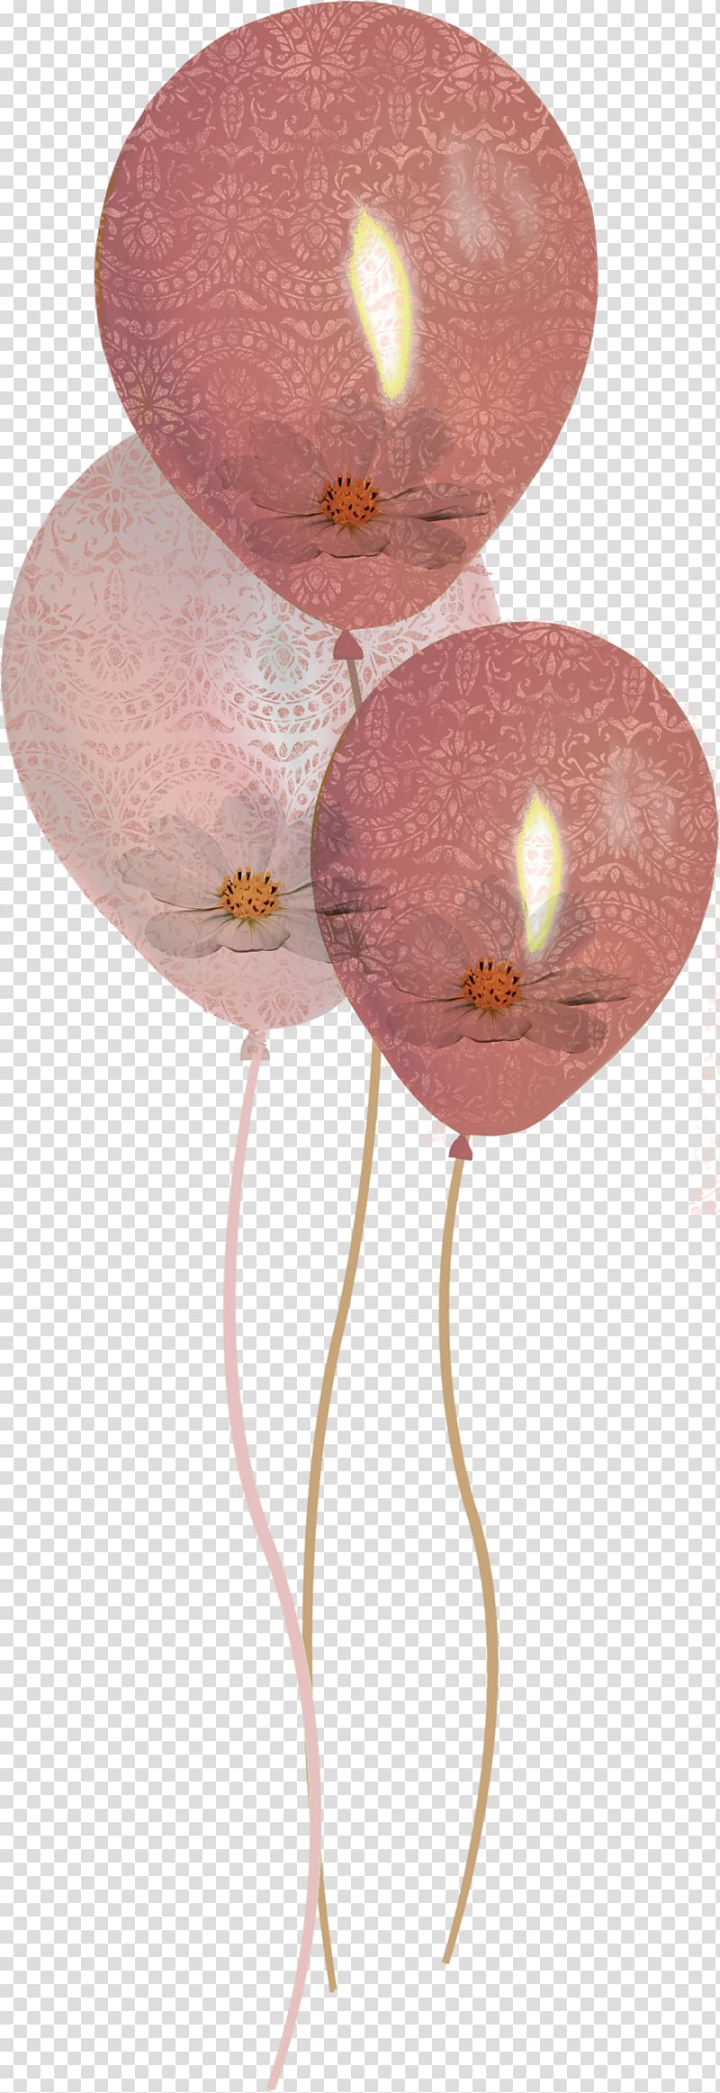 speech,balloon,happy,birthday,toy,brown,pattern,happy birthday to you,speech balloon,geometric pattern,retro pattern,wave pattern,flower,toy balloon,balloon cartoon,balloon pattern,pink,petal,objects,balloons,beautiful,flower pattern,beautiful balloon,brown balloon,abstract pattern,png clipart,free png,transparent background,free clipart,clip art,free download,png,comhiclipart